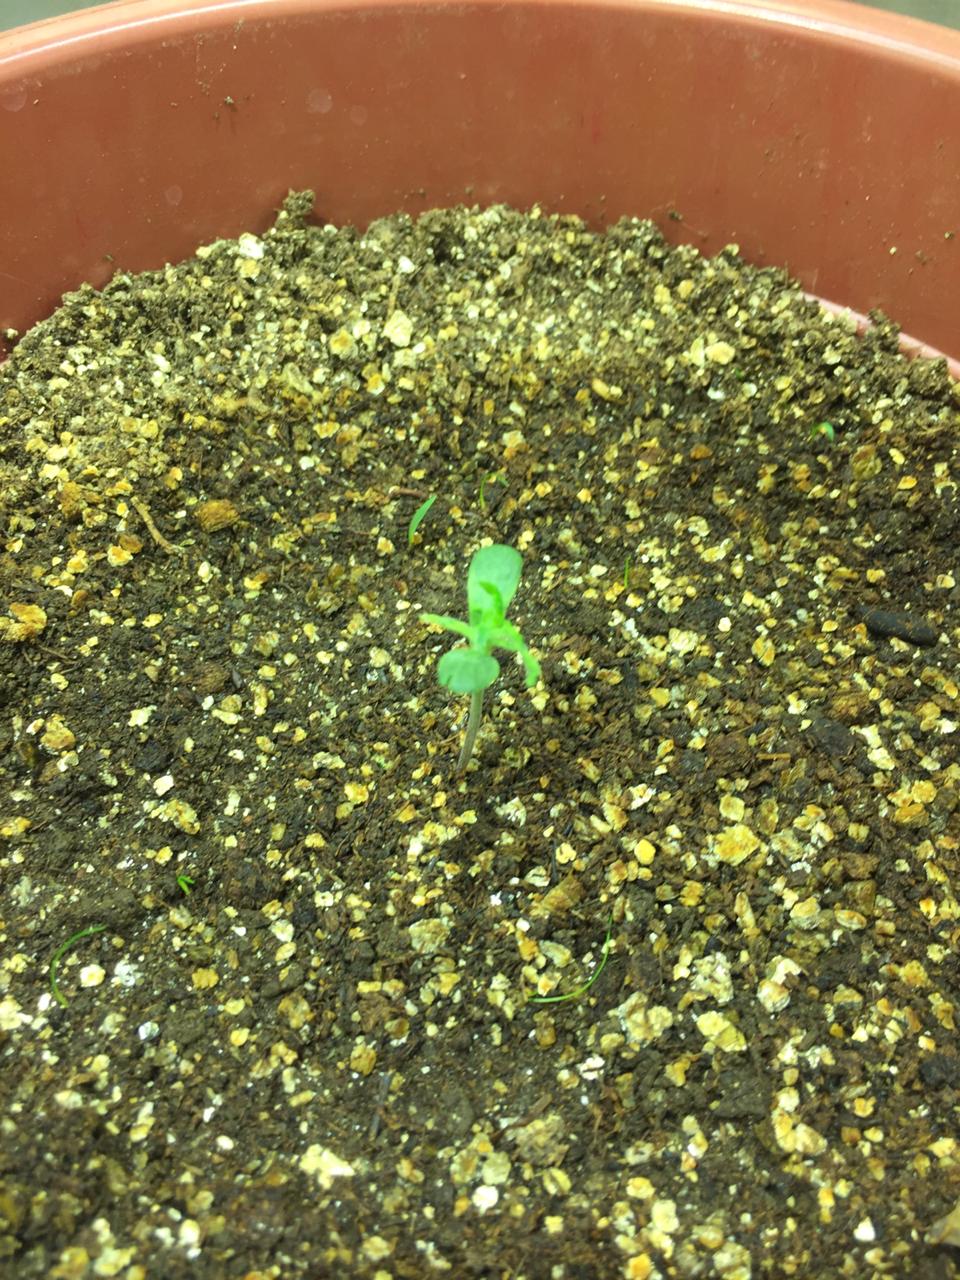 6 days into seedling they look weak what is wrong 1st time